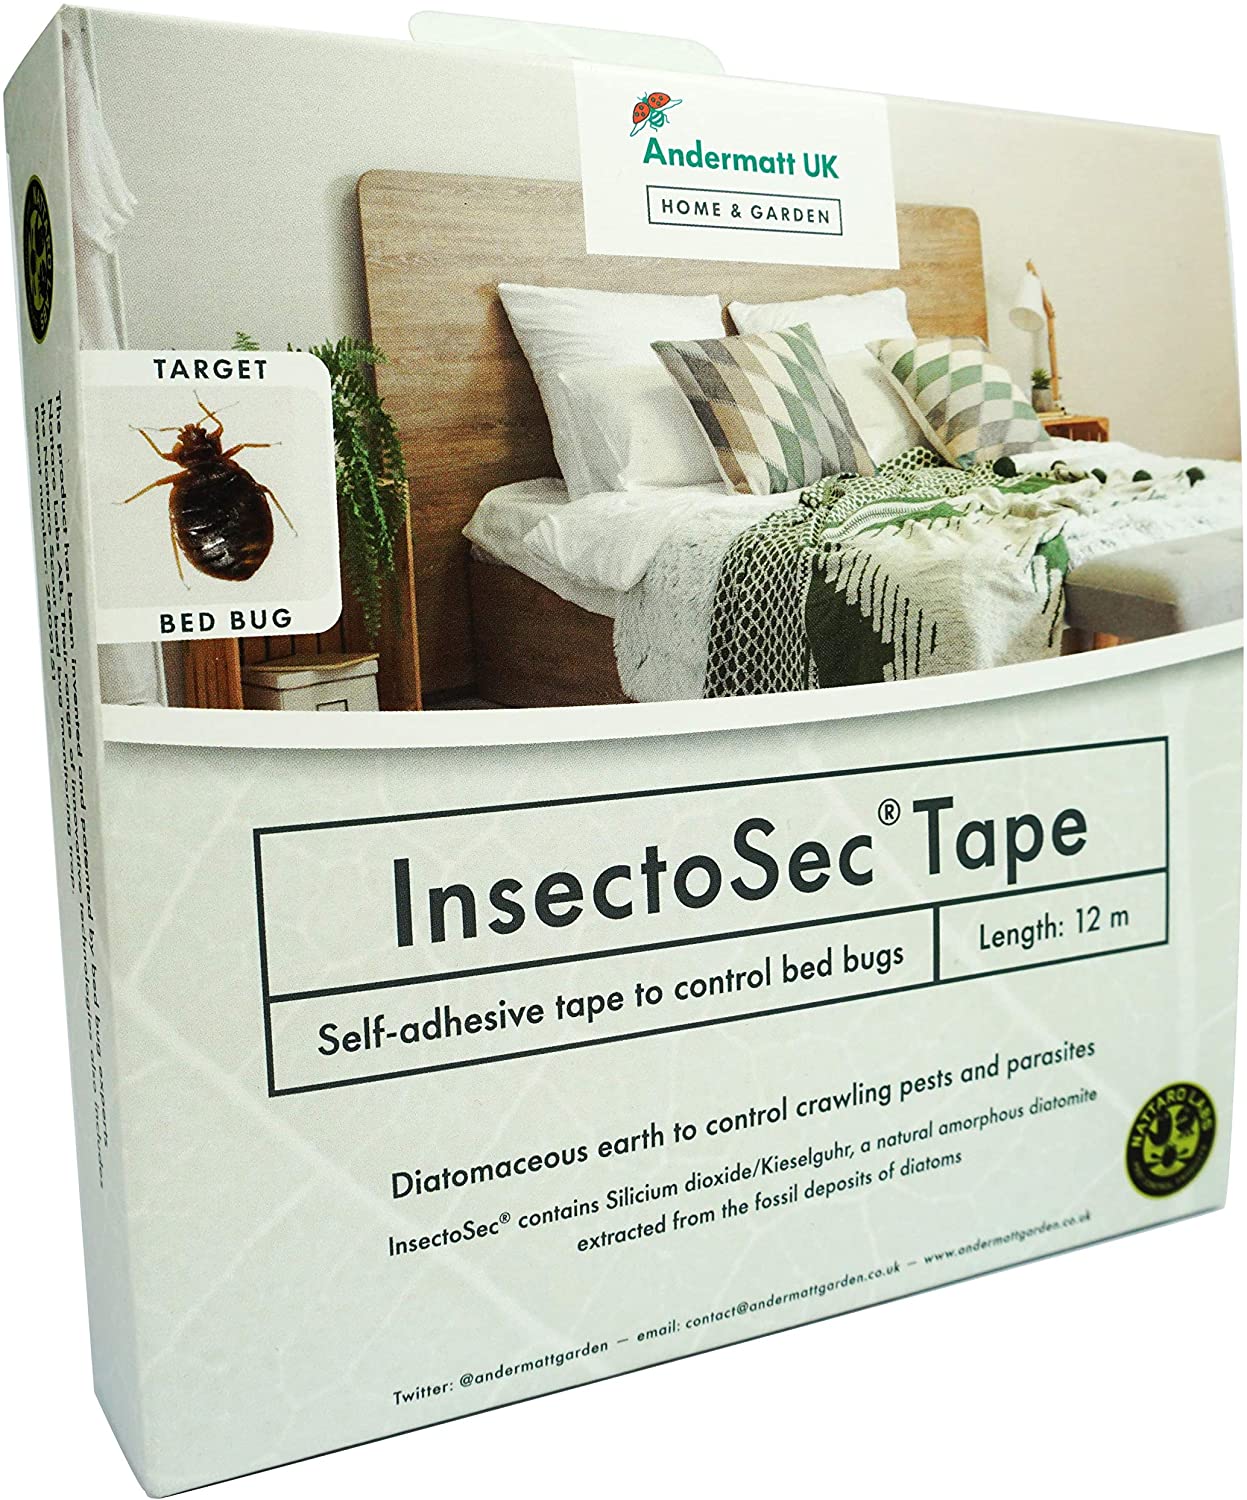 Photo of the InsectoSec Tape packaging.